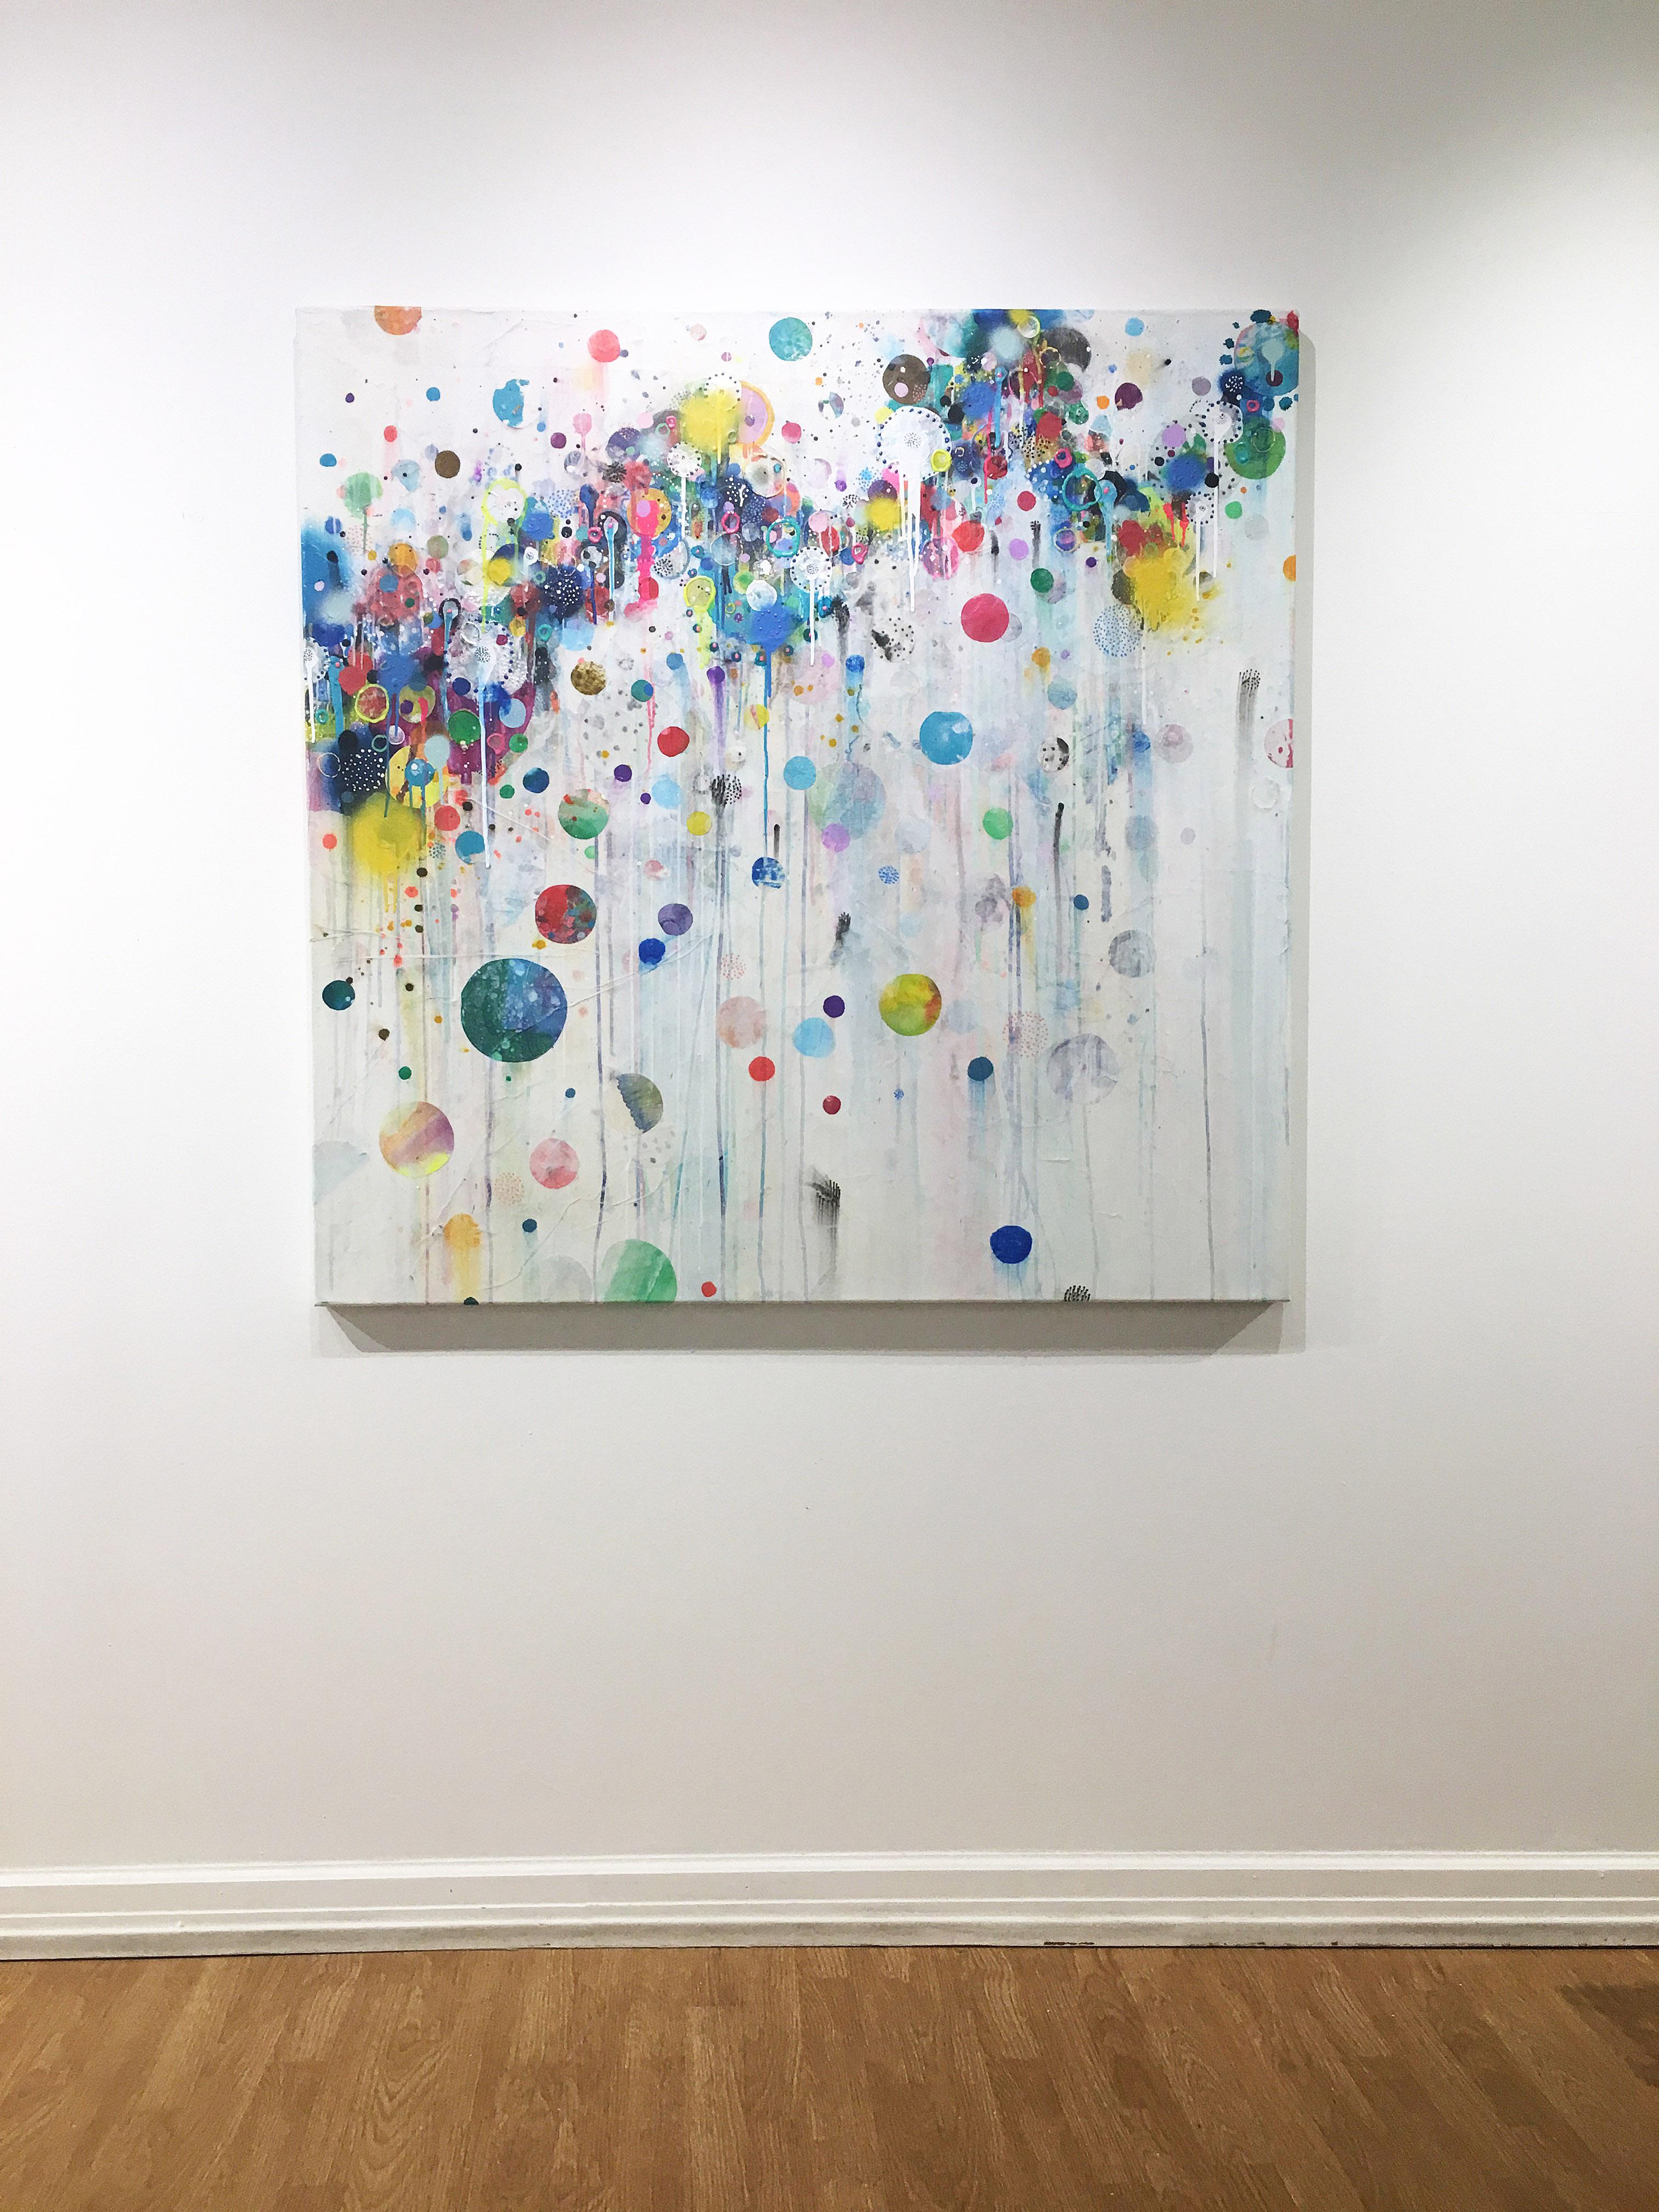 'Nico' 2019 by Seattle based abstract painter, Liz Tran. Mixed media on panel, 48 x 48 in. The featured “Party” paintings are festooned with bold neon colored bubbles, streamers, splatters, and elongated drips. Composed of ink, acrylic, graphite,